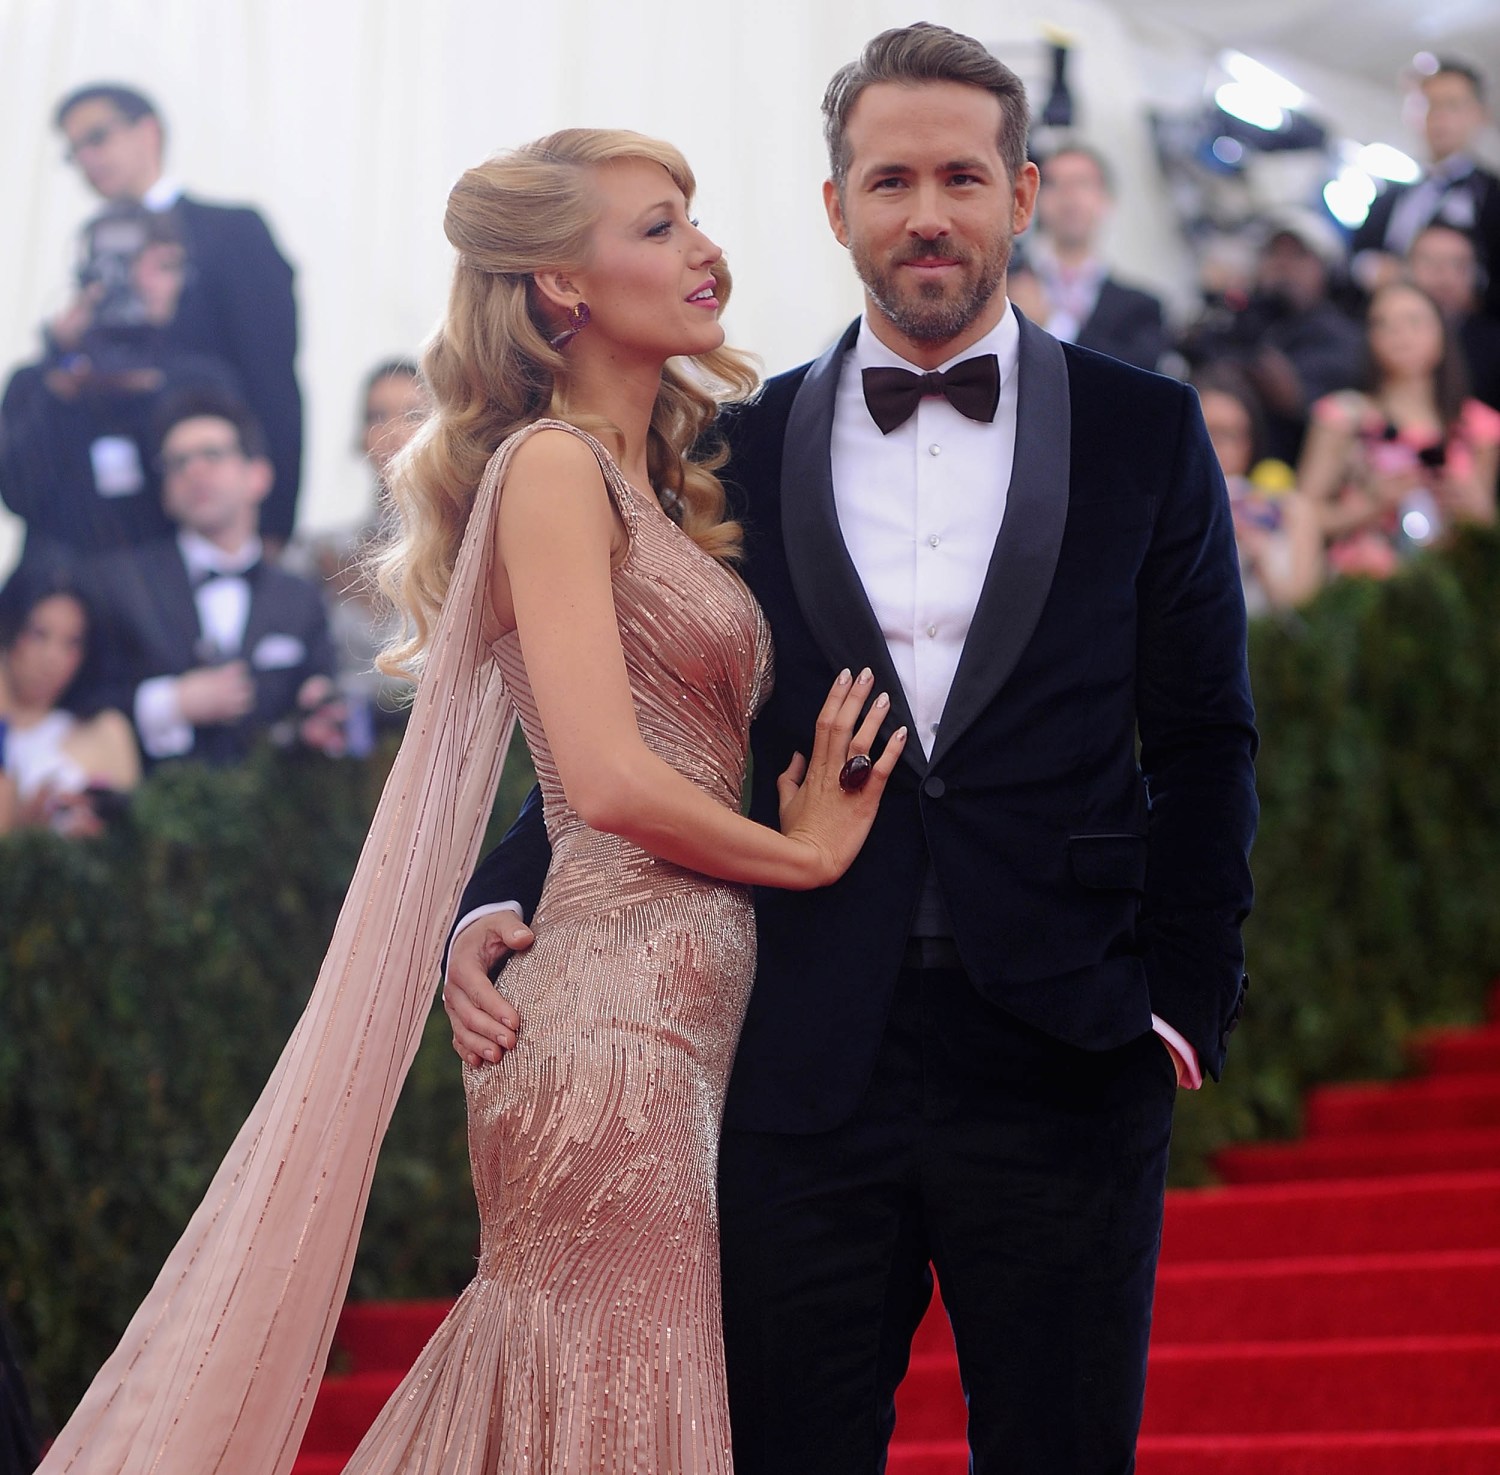 Blake Lively Shares The Rule She and Ryan Reynolds Made When They